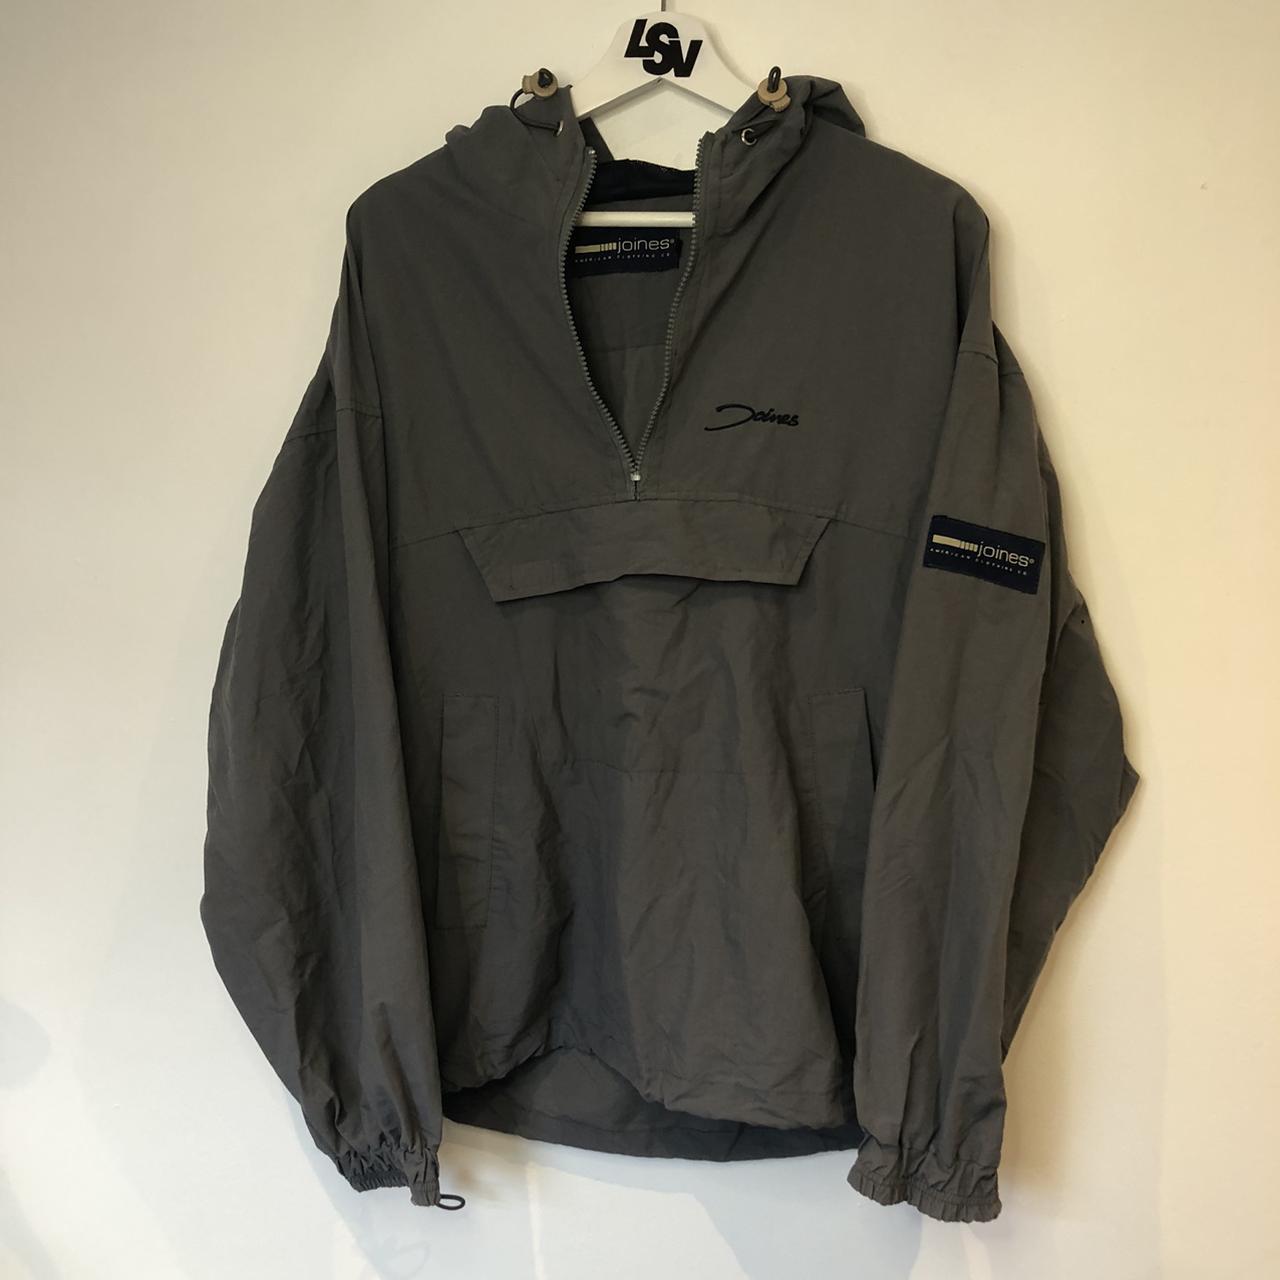 Grey 1/4 jacket front the brand Joines. Really nice - Depop